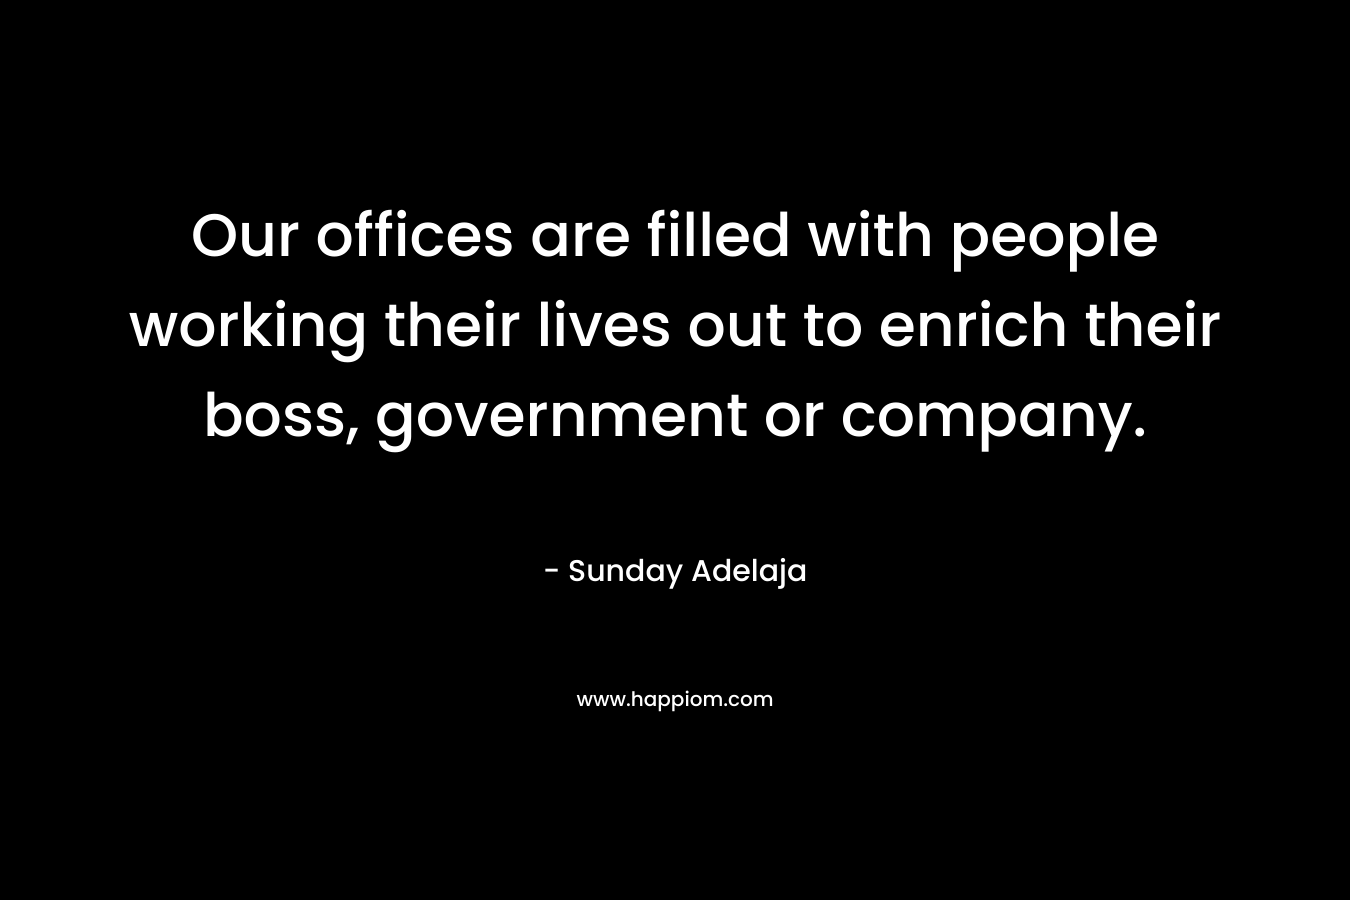 Our offices are filled with people working their lives out to enrich their boss, government or company. – Sunday Adelaja